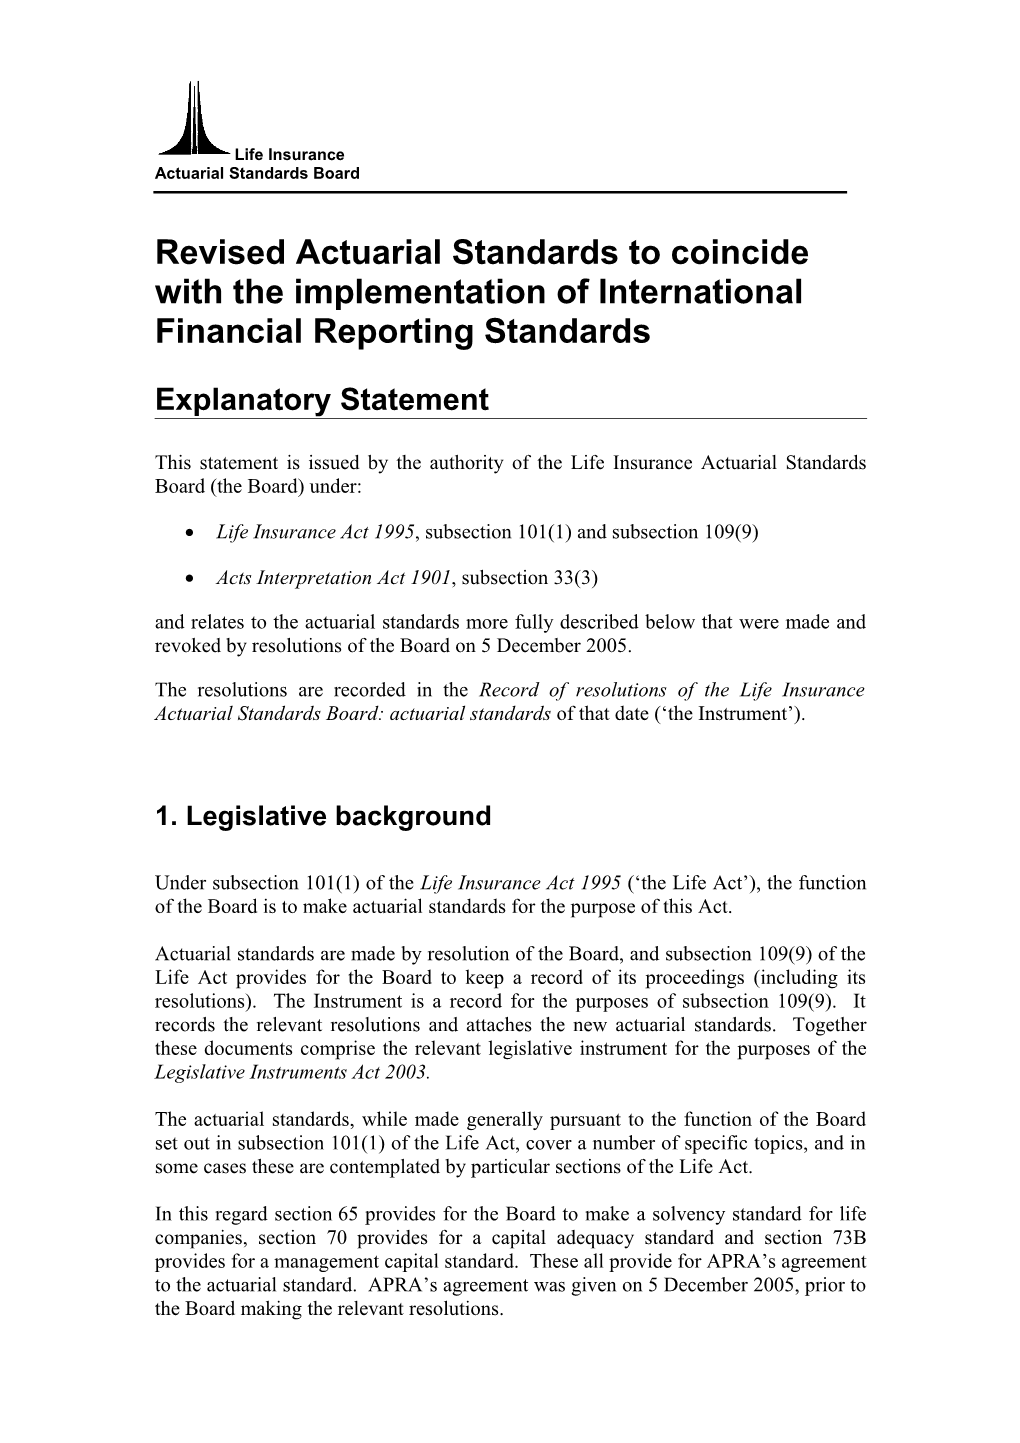 Actuarial Standards and Ifrs